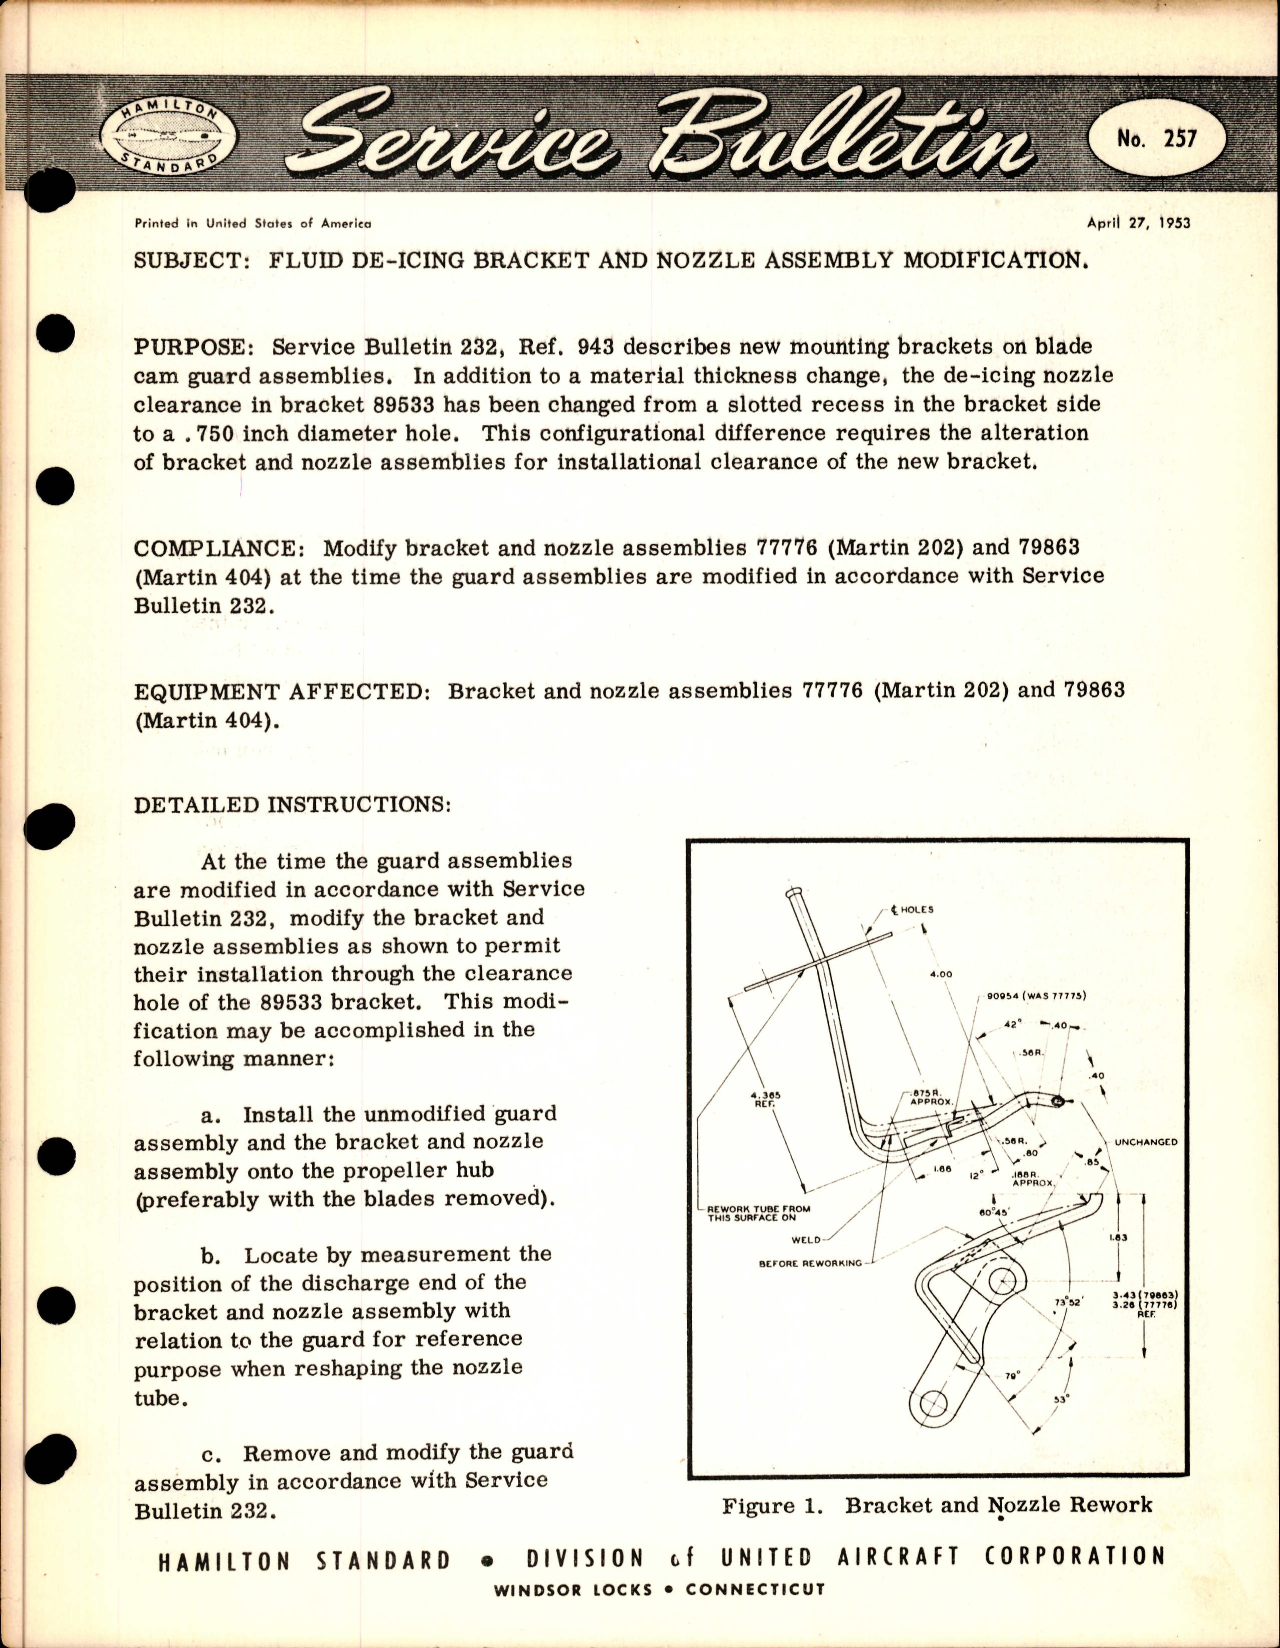 Sample page 1 from AirCorps Library document: Fluid De-Icing Bracket and Nozzle Assembly Modification 